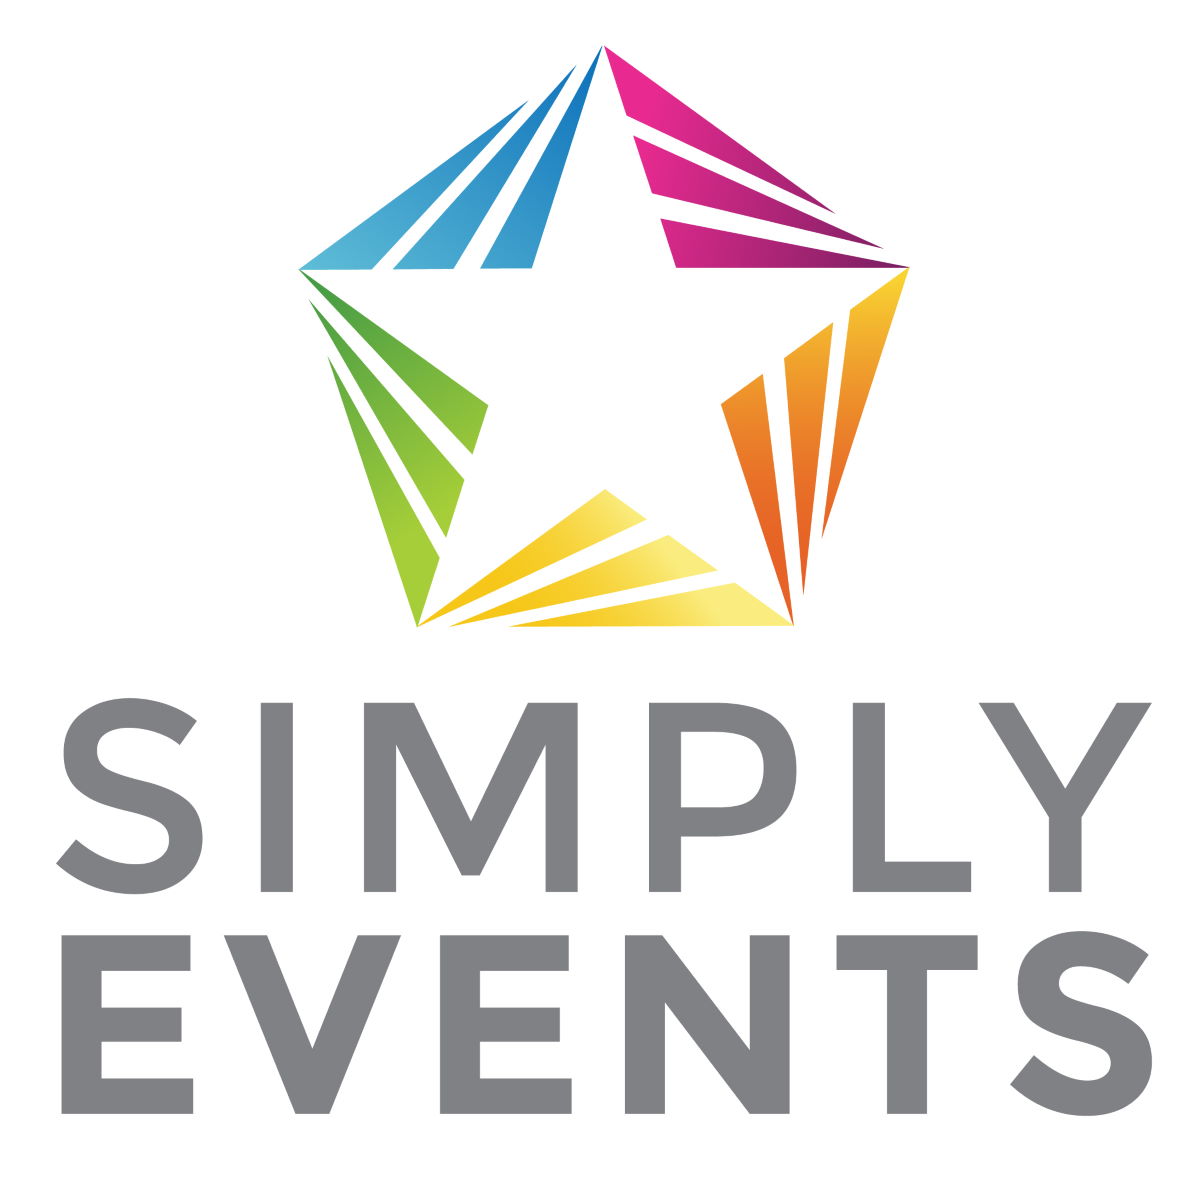 
Simply Events